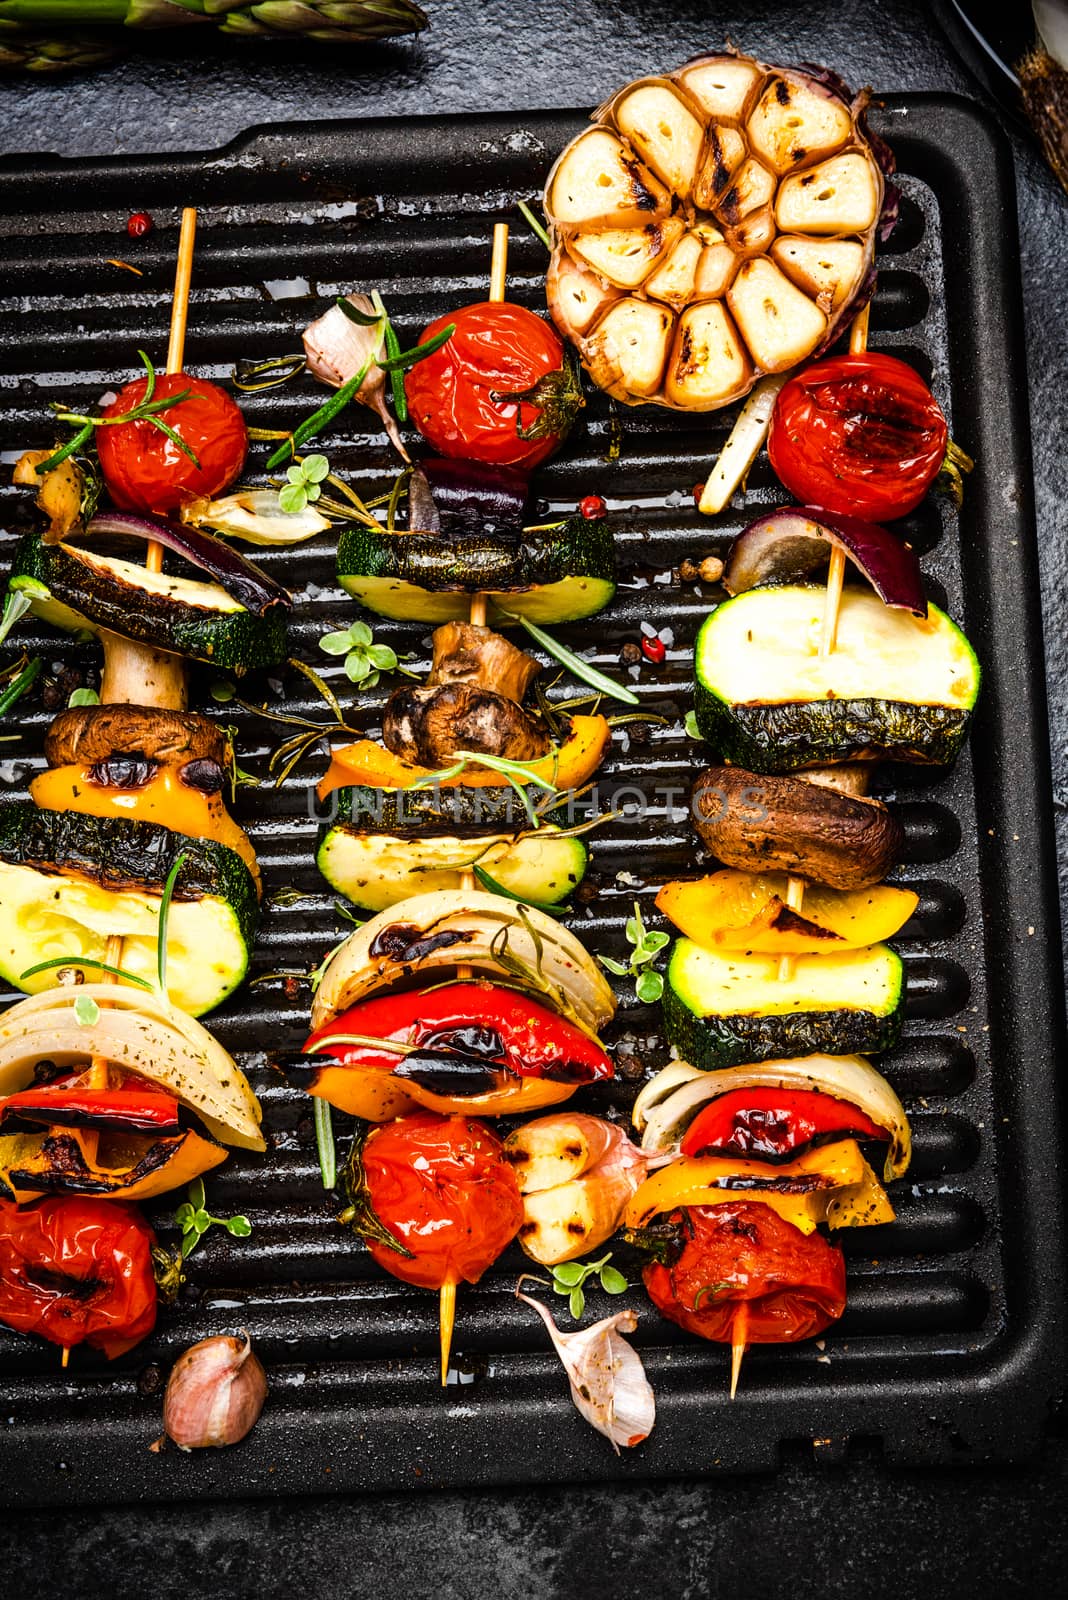 BBQ Grilled Wegetables on Skewers with Fresh Herbs and Spices. Summer Barbecue Food.